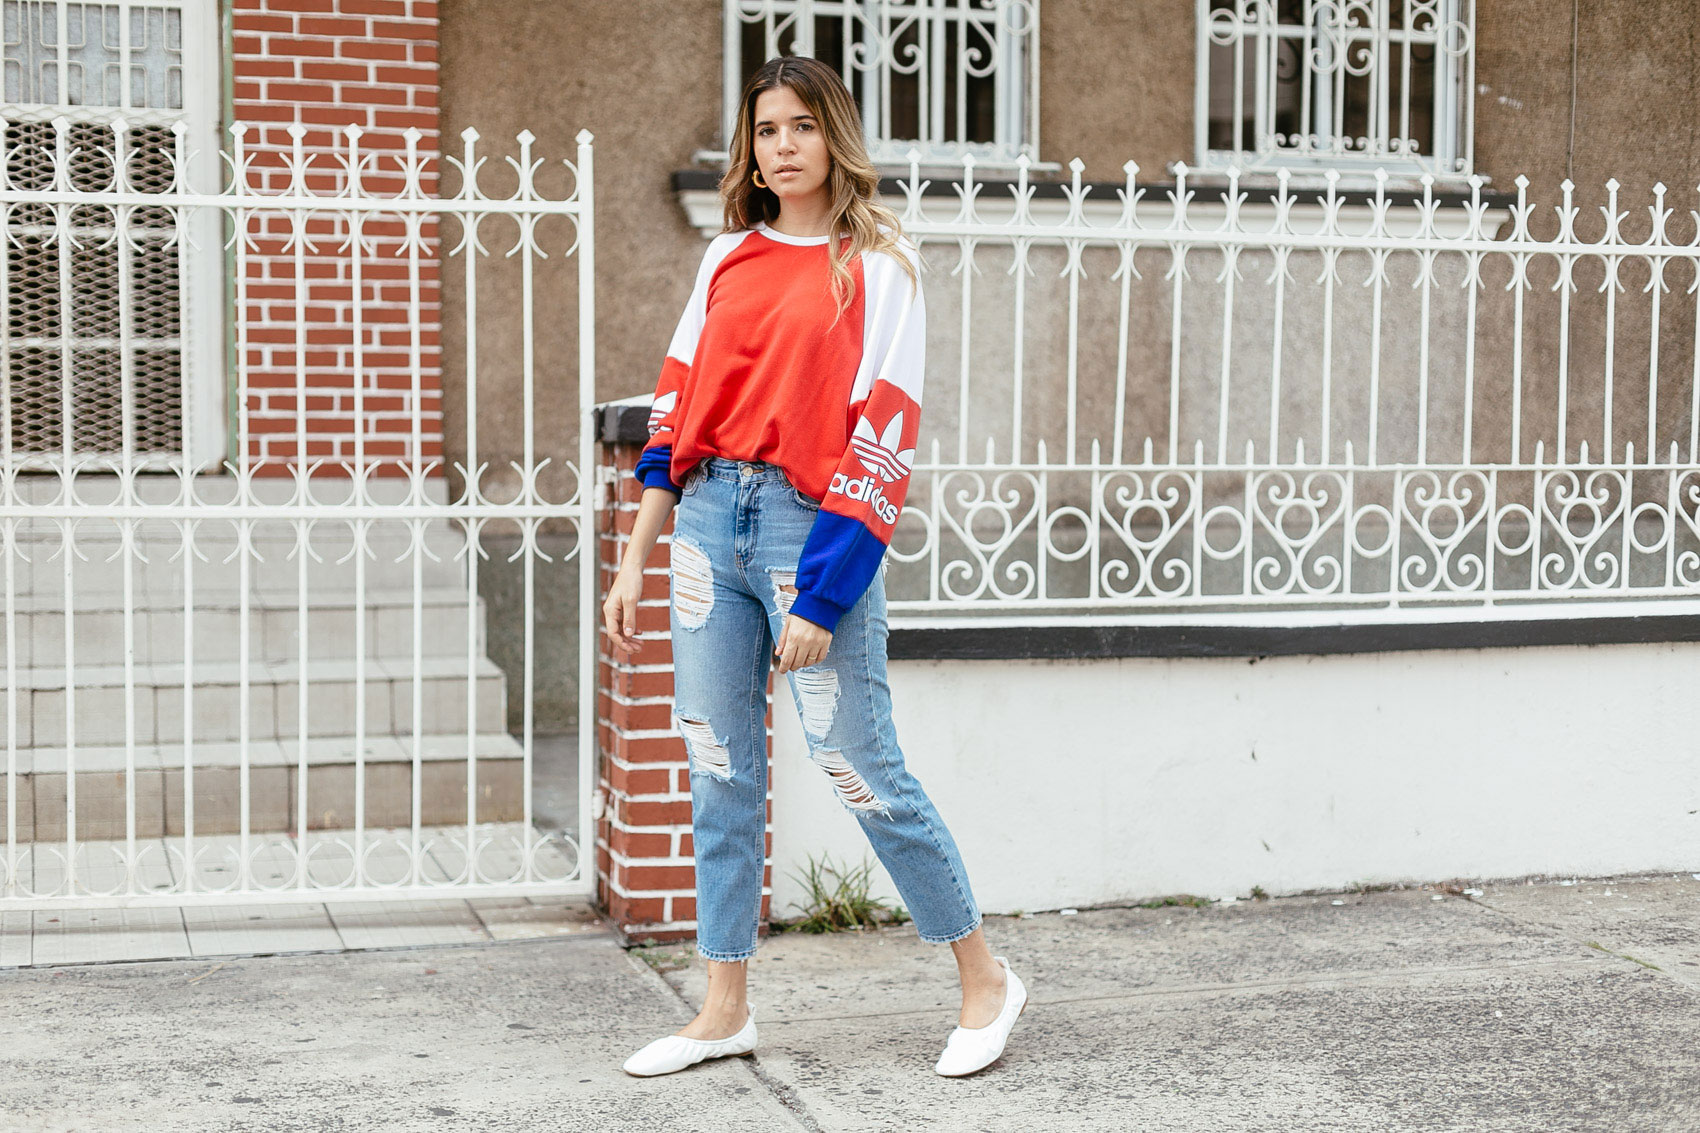 Maristella is French chic in red, white and blue with adidas and Céline